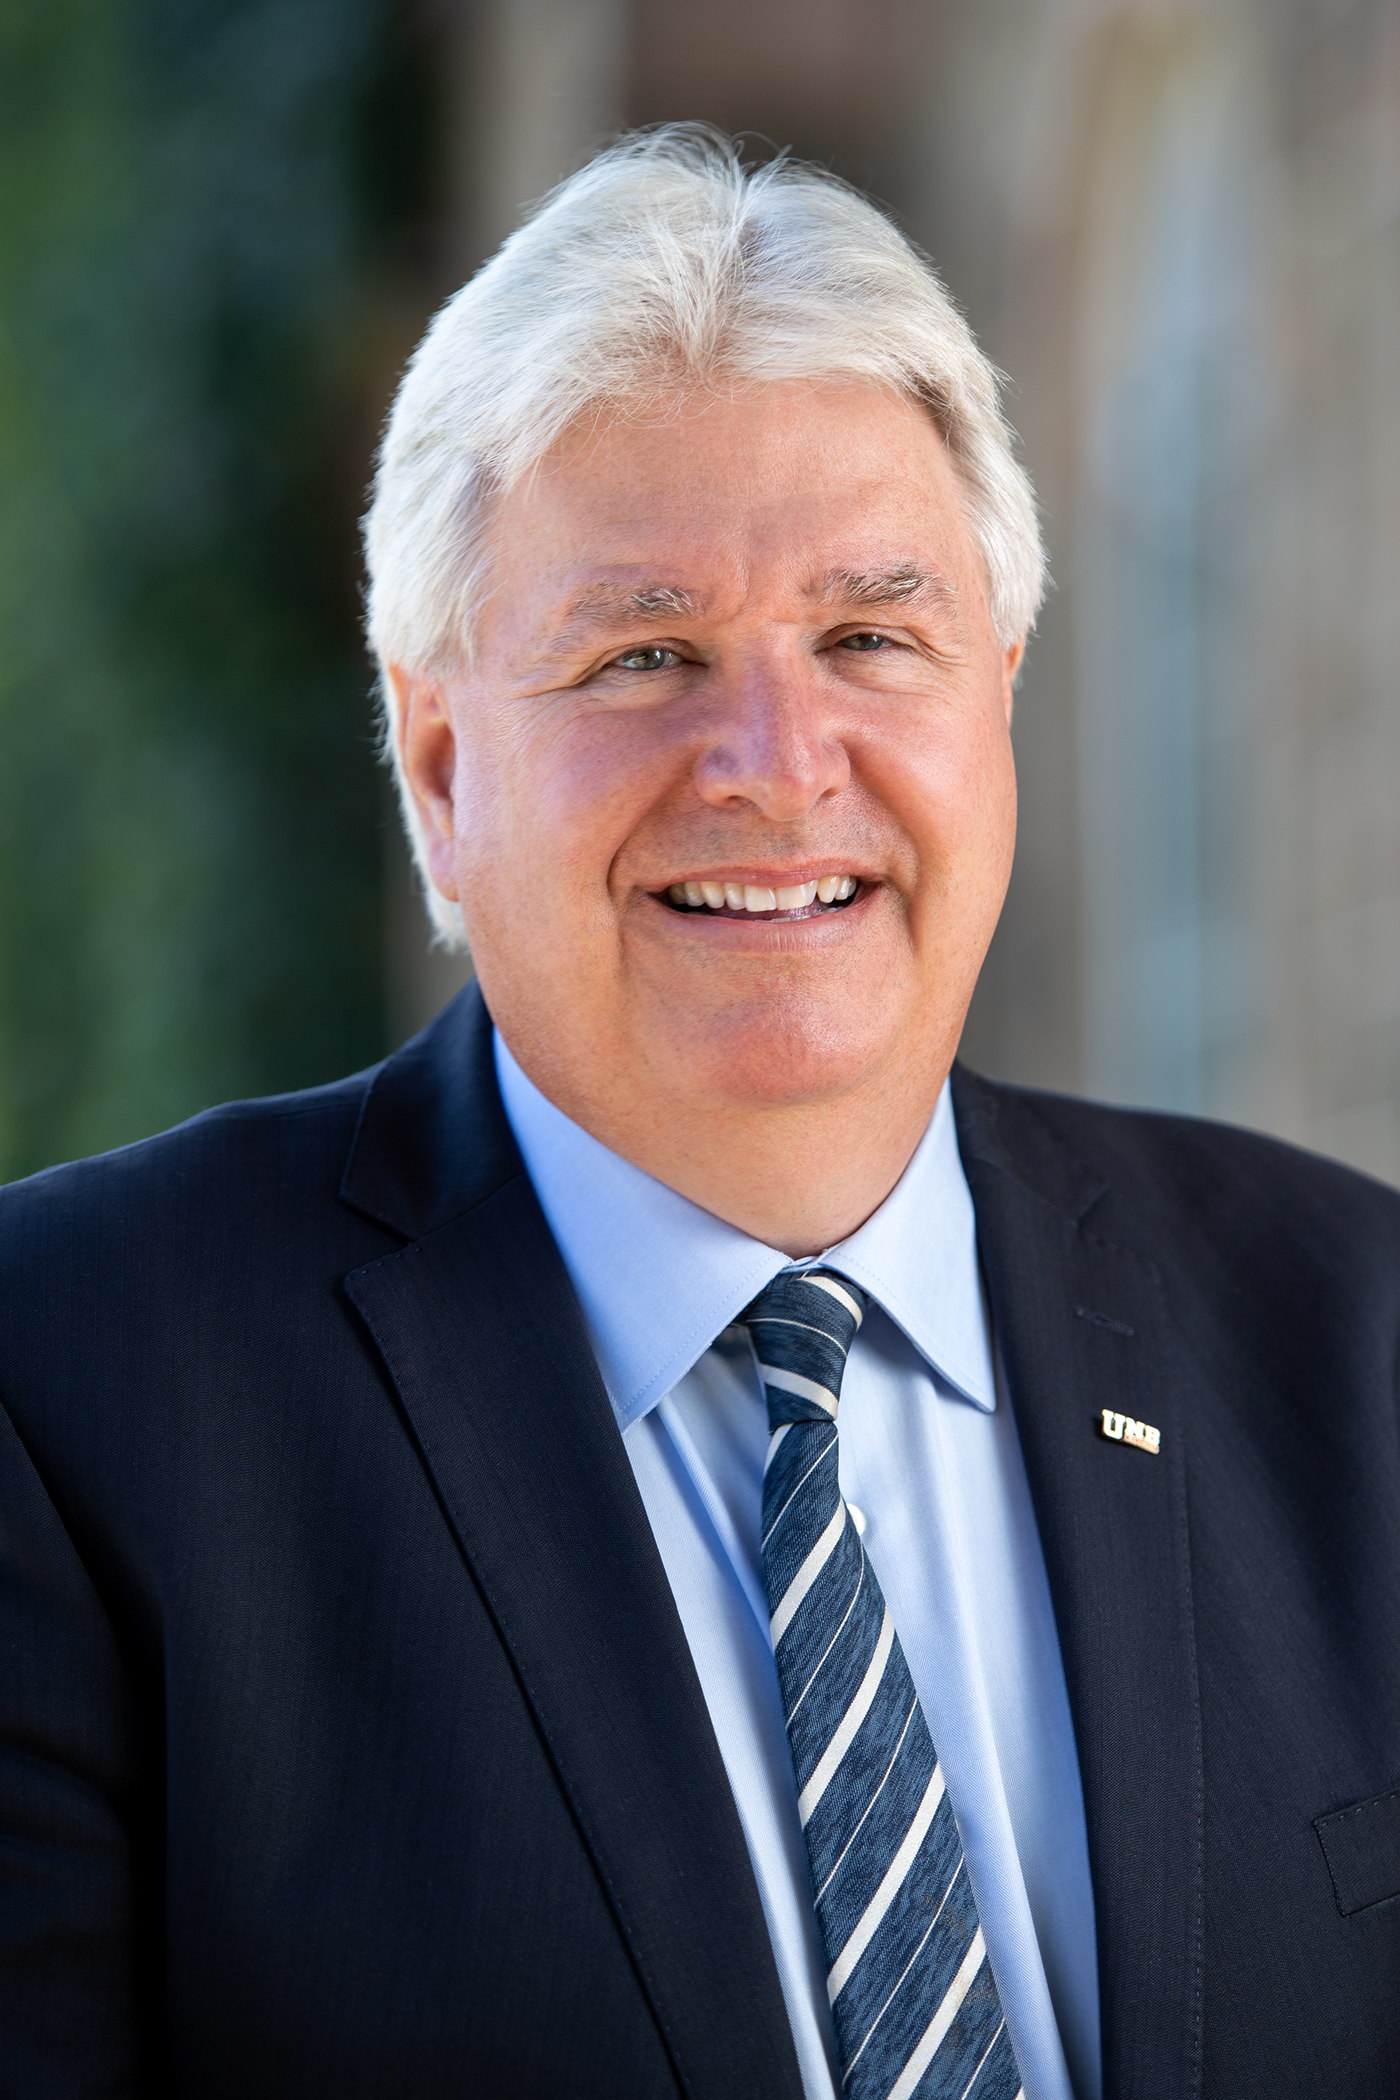 Paul Mazerolle, UNB President and Vice Chancellor